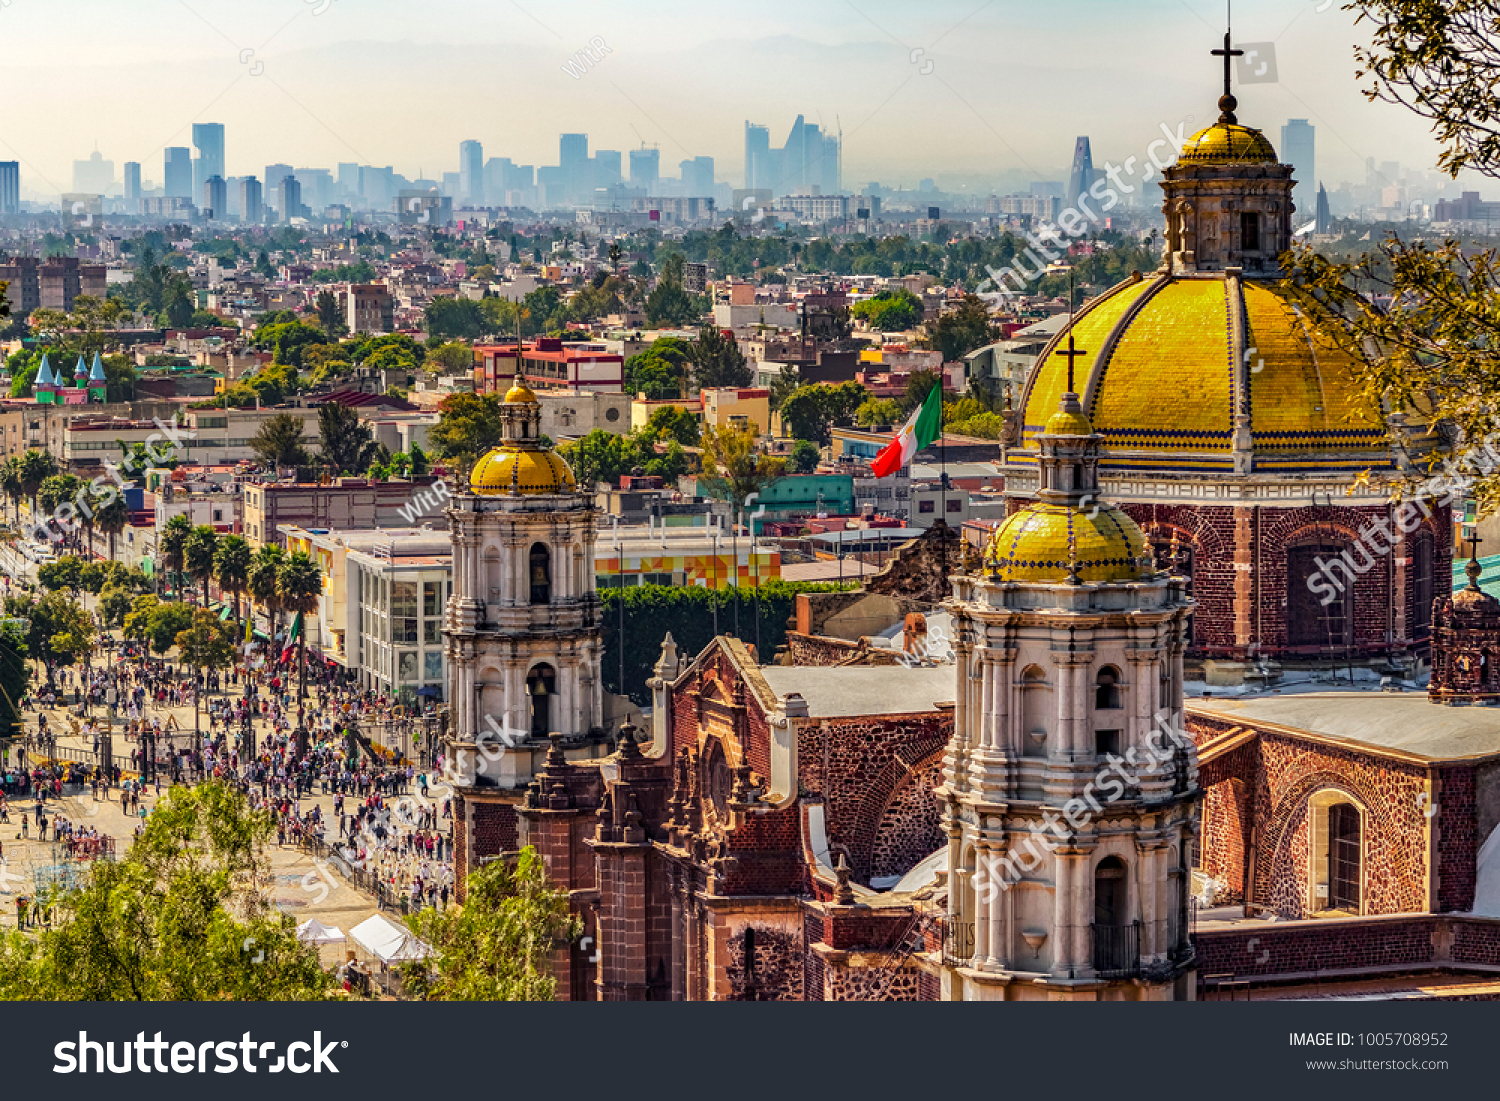 Mexico. Basilica of Our Lady of Guadalupe. Cupolas of the old basilica and cityscape of Mexico City on the far #1005708952